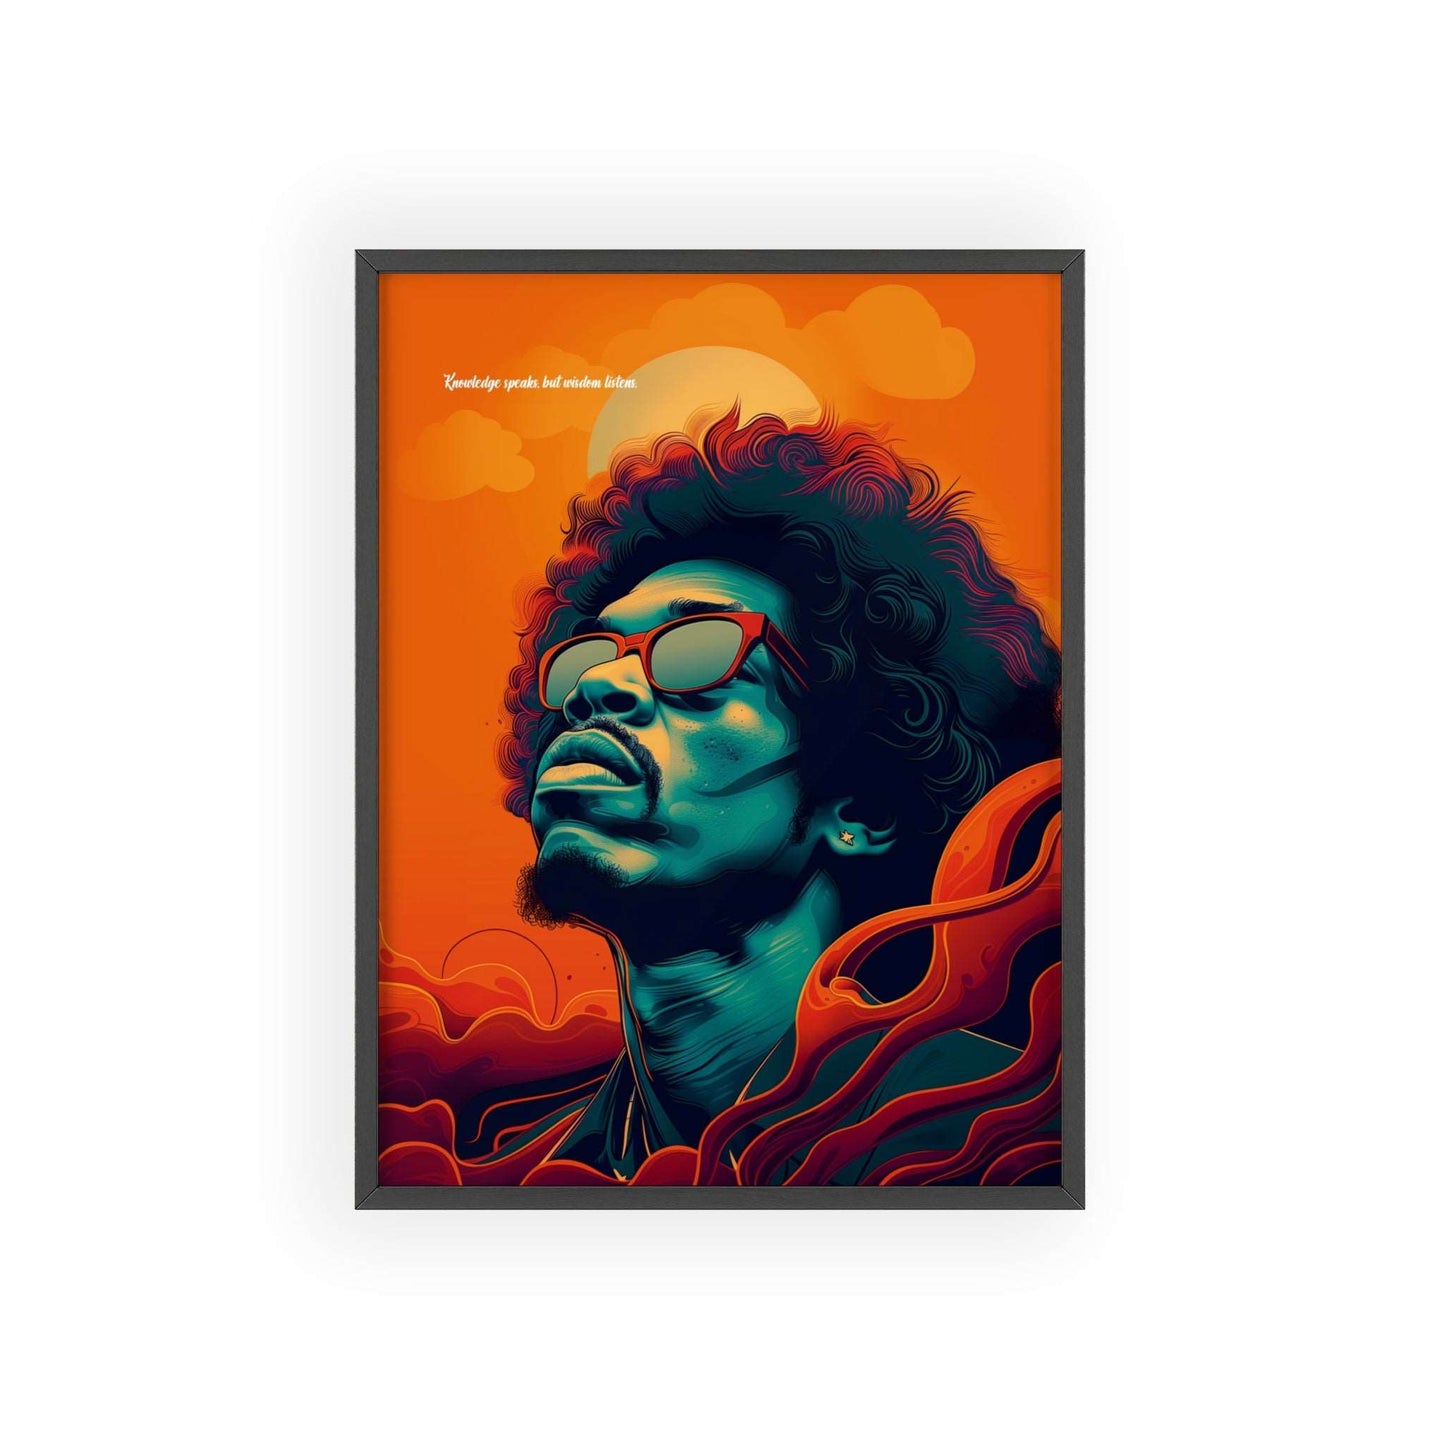 Original wall art with Jimi Hendrix's quote: 'The Knowledge speaks but Wisdom listens,' perfect for adding inspiration and style to your home decor.